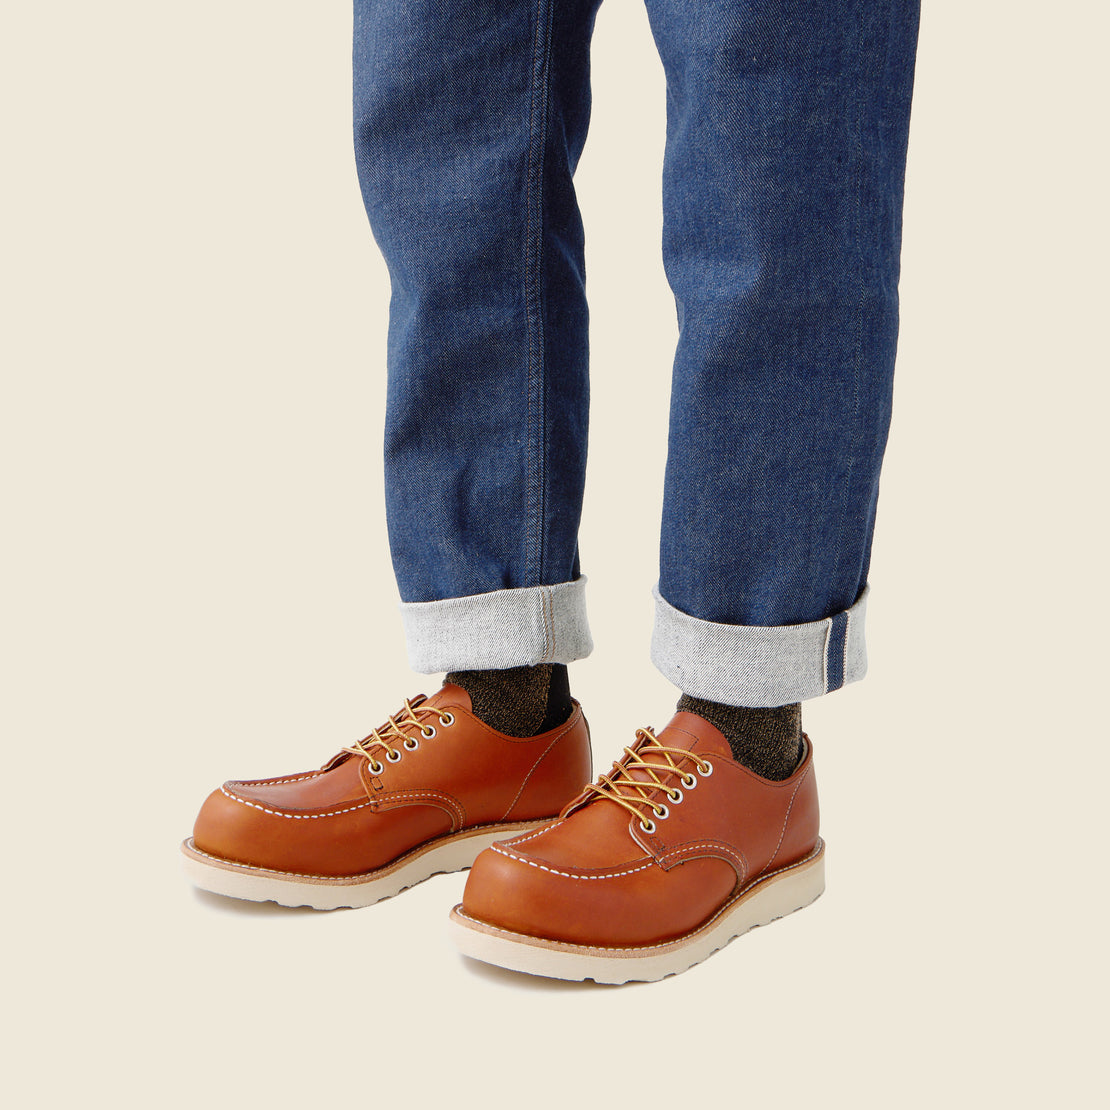 Shop Moc Oxford No. 8092 - Oro Legacy - Red Wing - STAG Provisions - Shoes - Boots / Chukkas